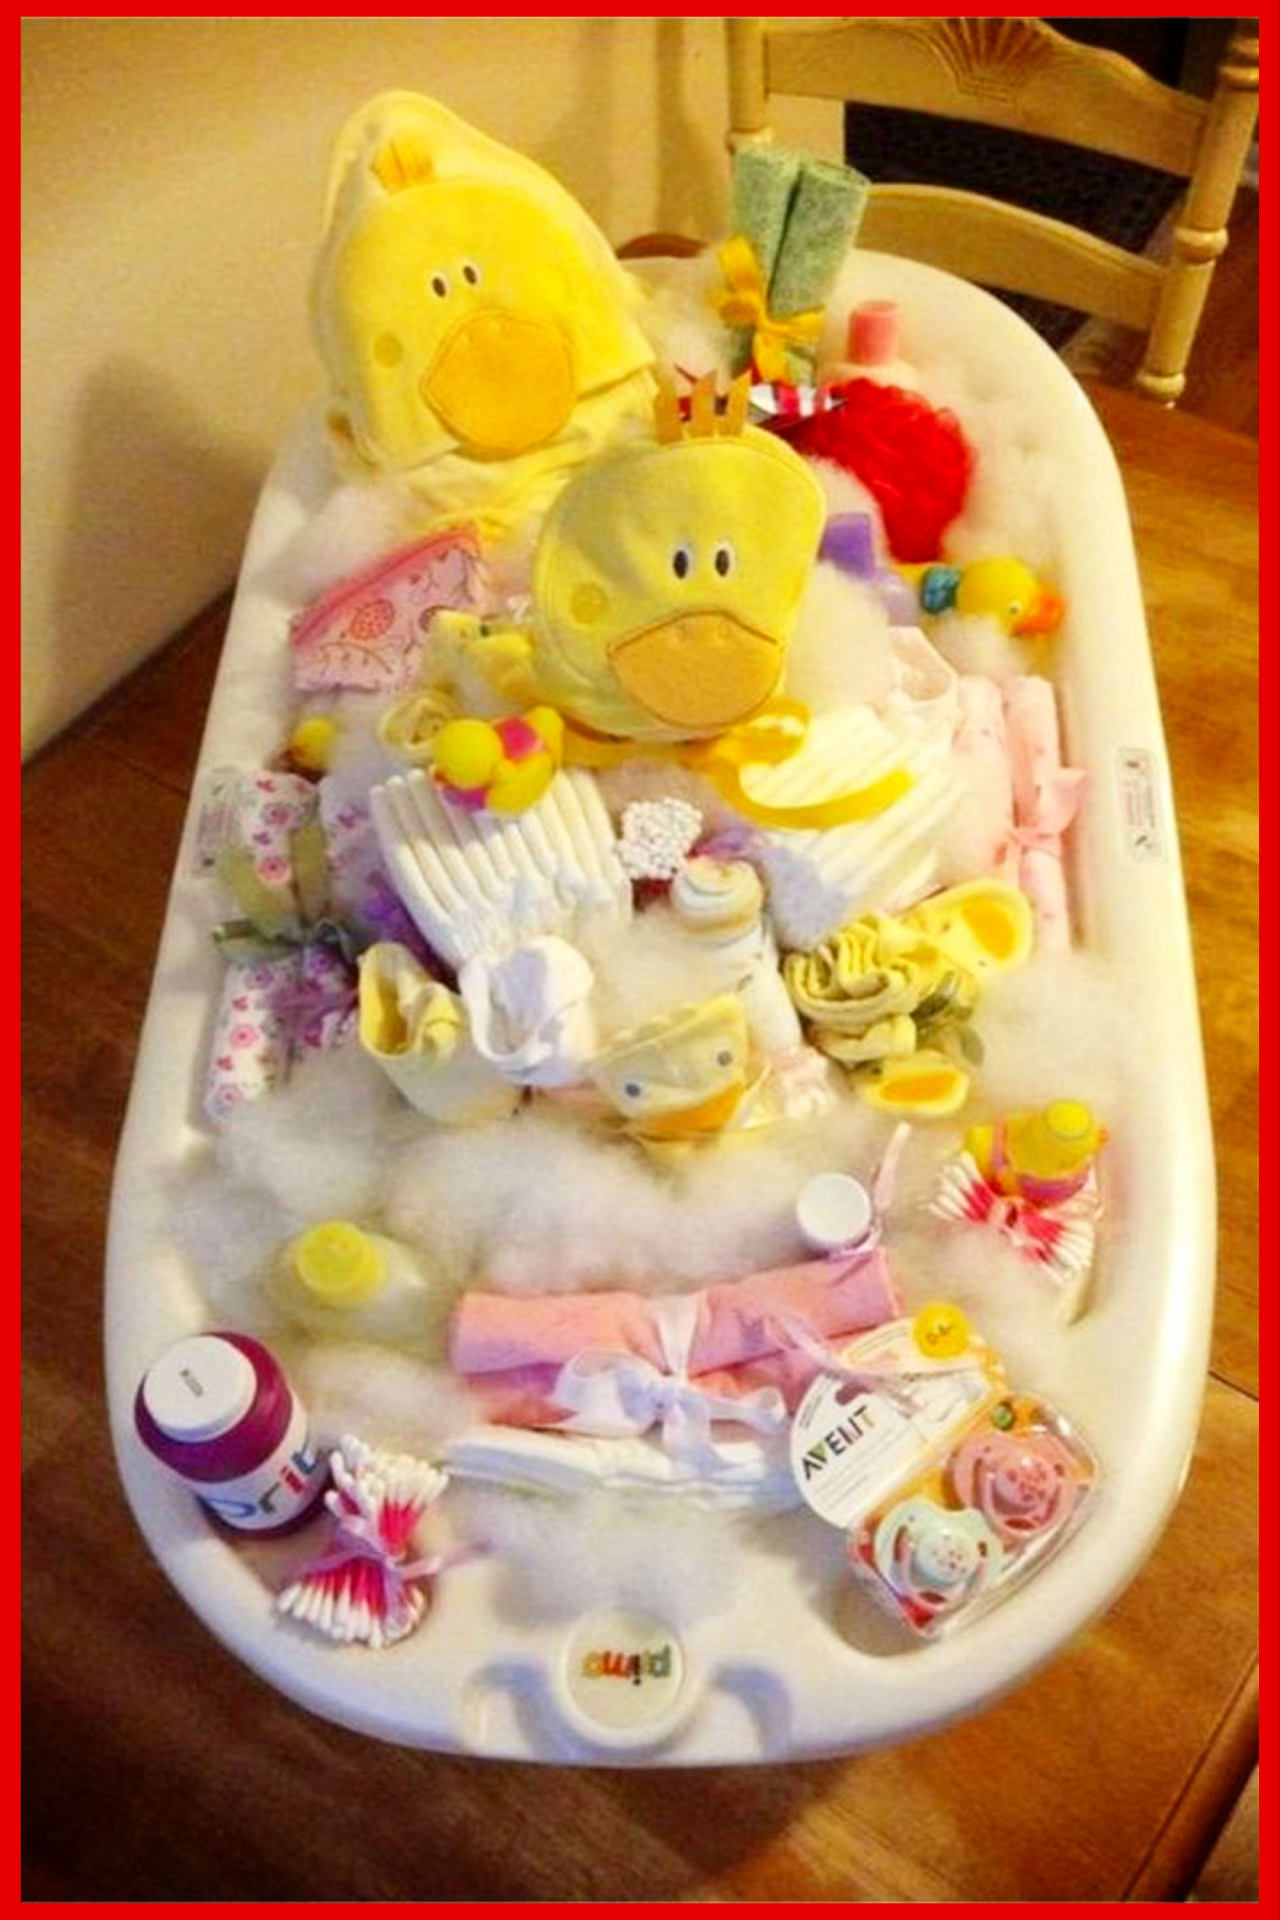 Baby shower gift ideas - simple baby shower gifts to make - unique homemade baby shower gift basket ideas